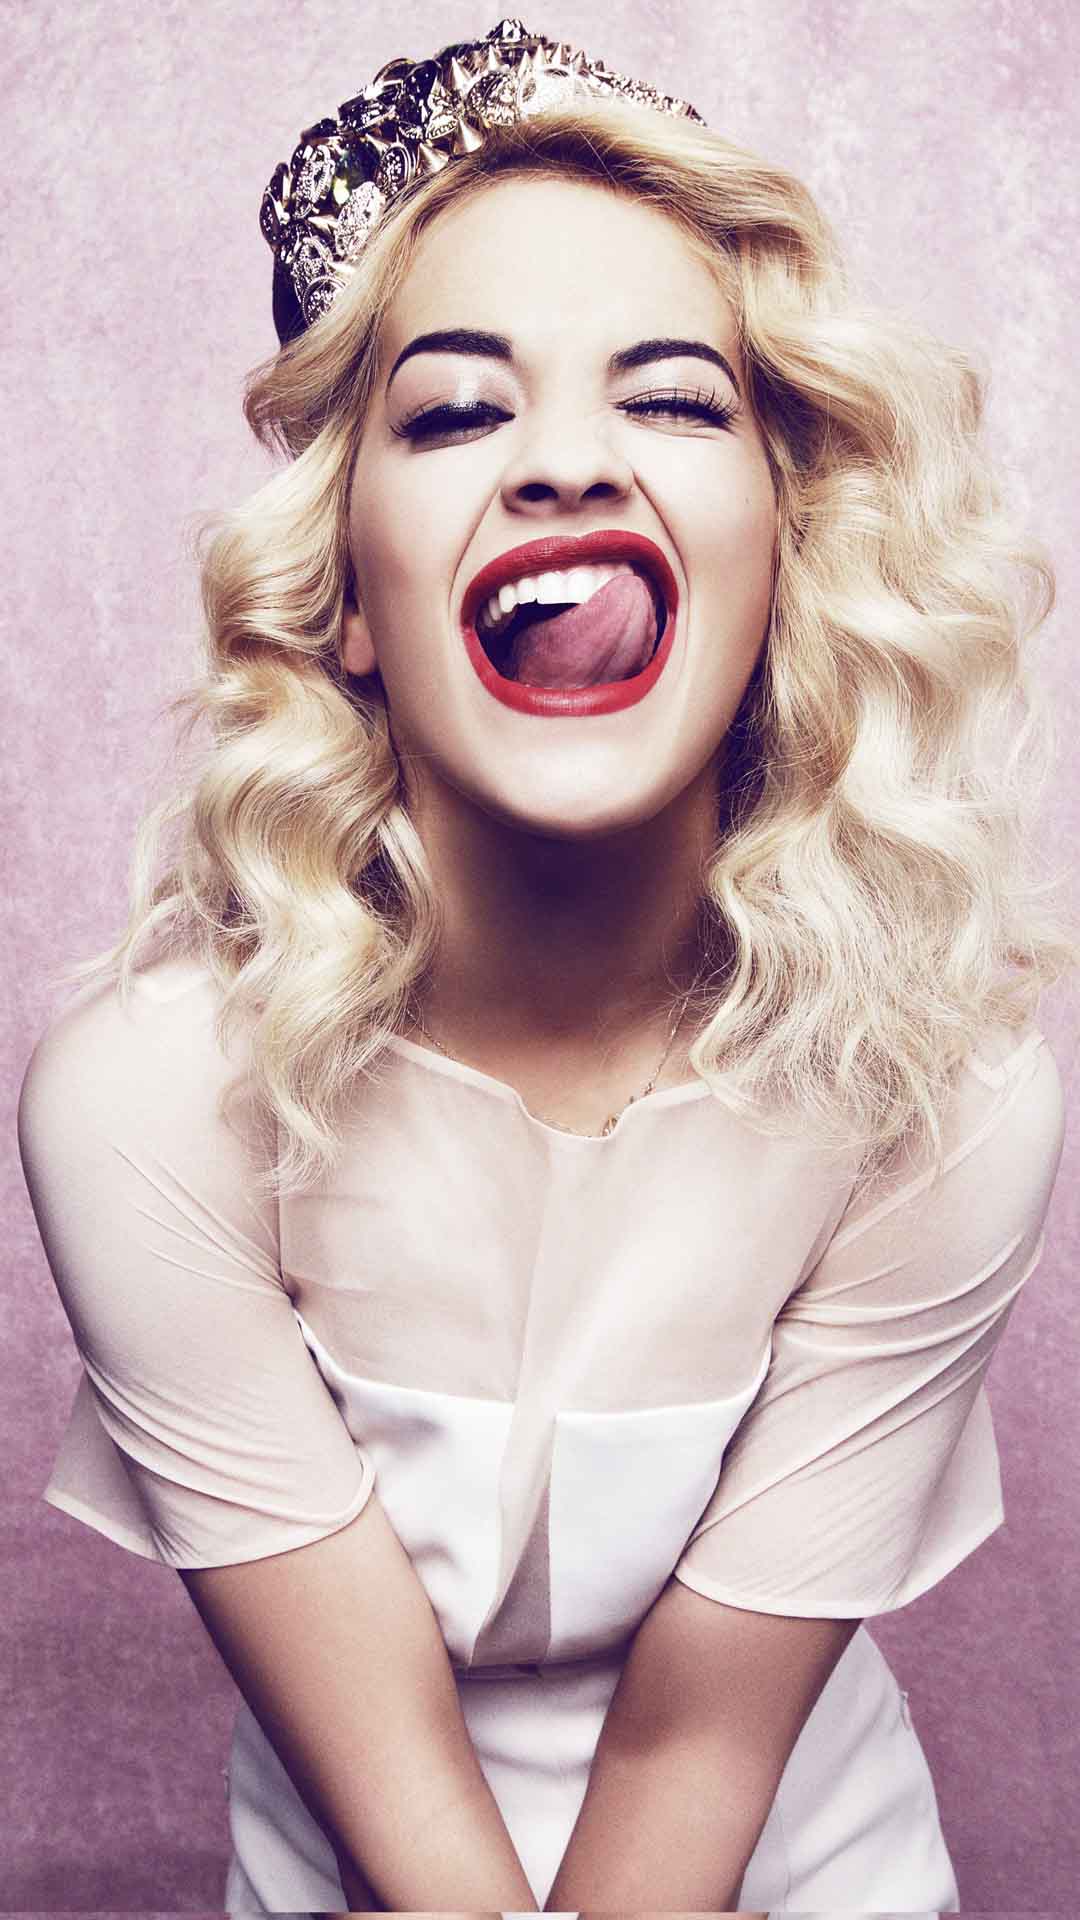 Rita Ora htc one wallpaper, free and easy to download